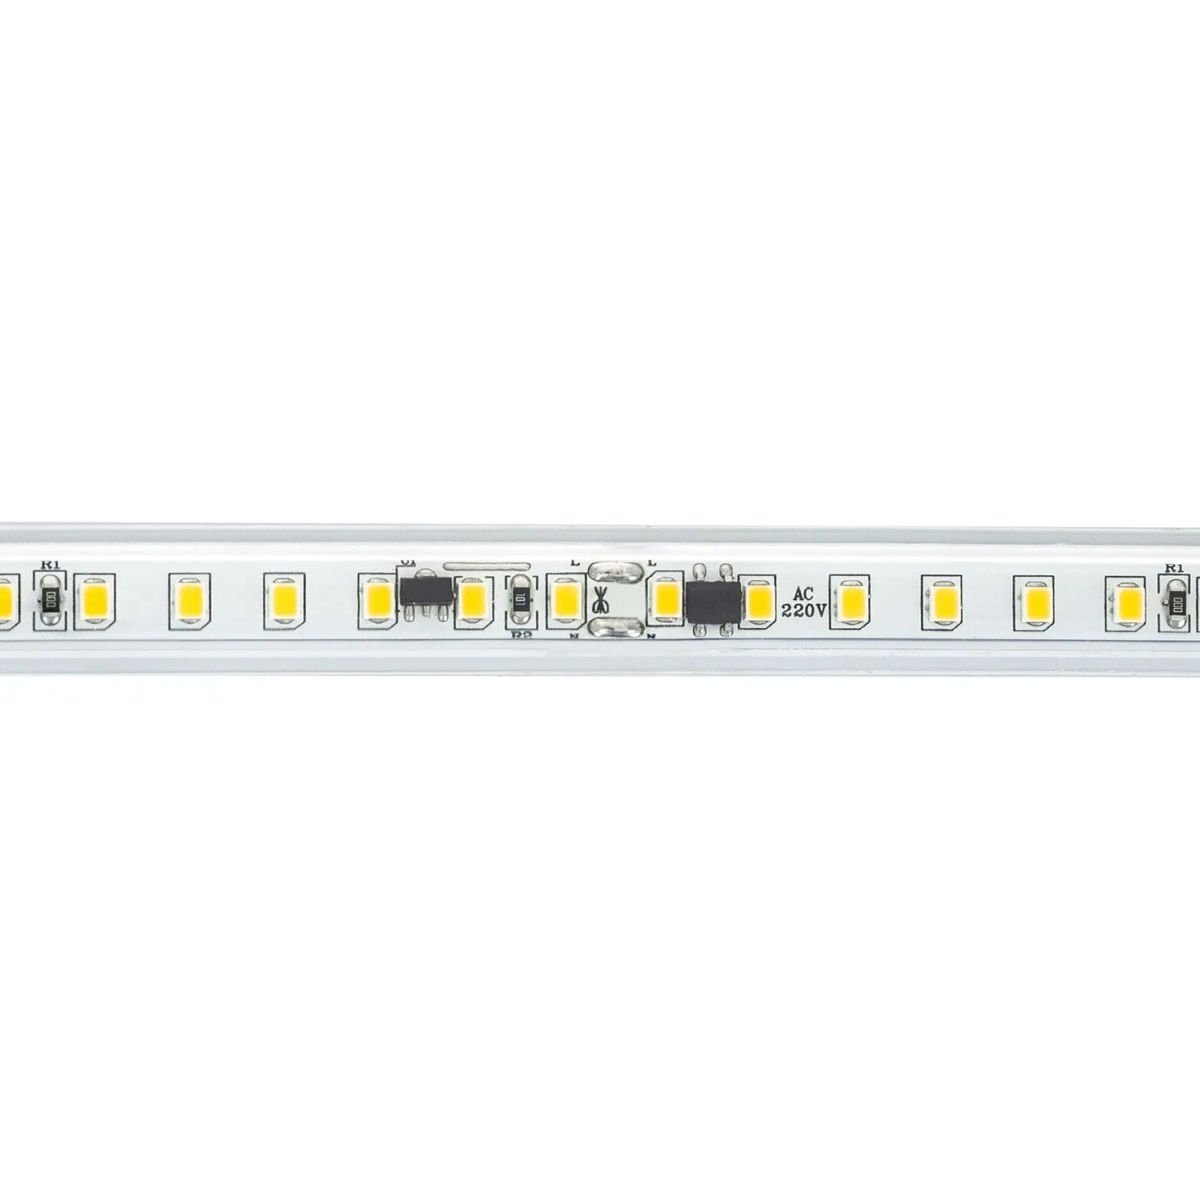 Ruban LED Dimmable 220V AC 60LED/m RGB IP65 Largeur 14mm Coupe